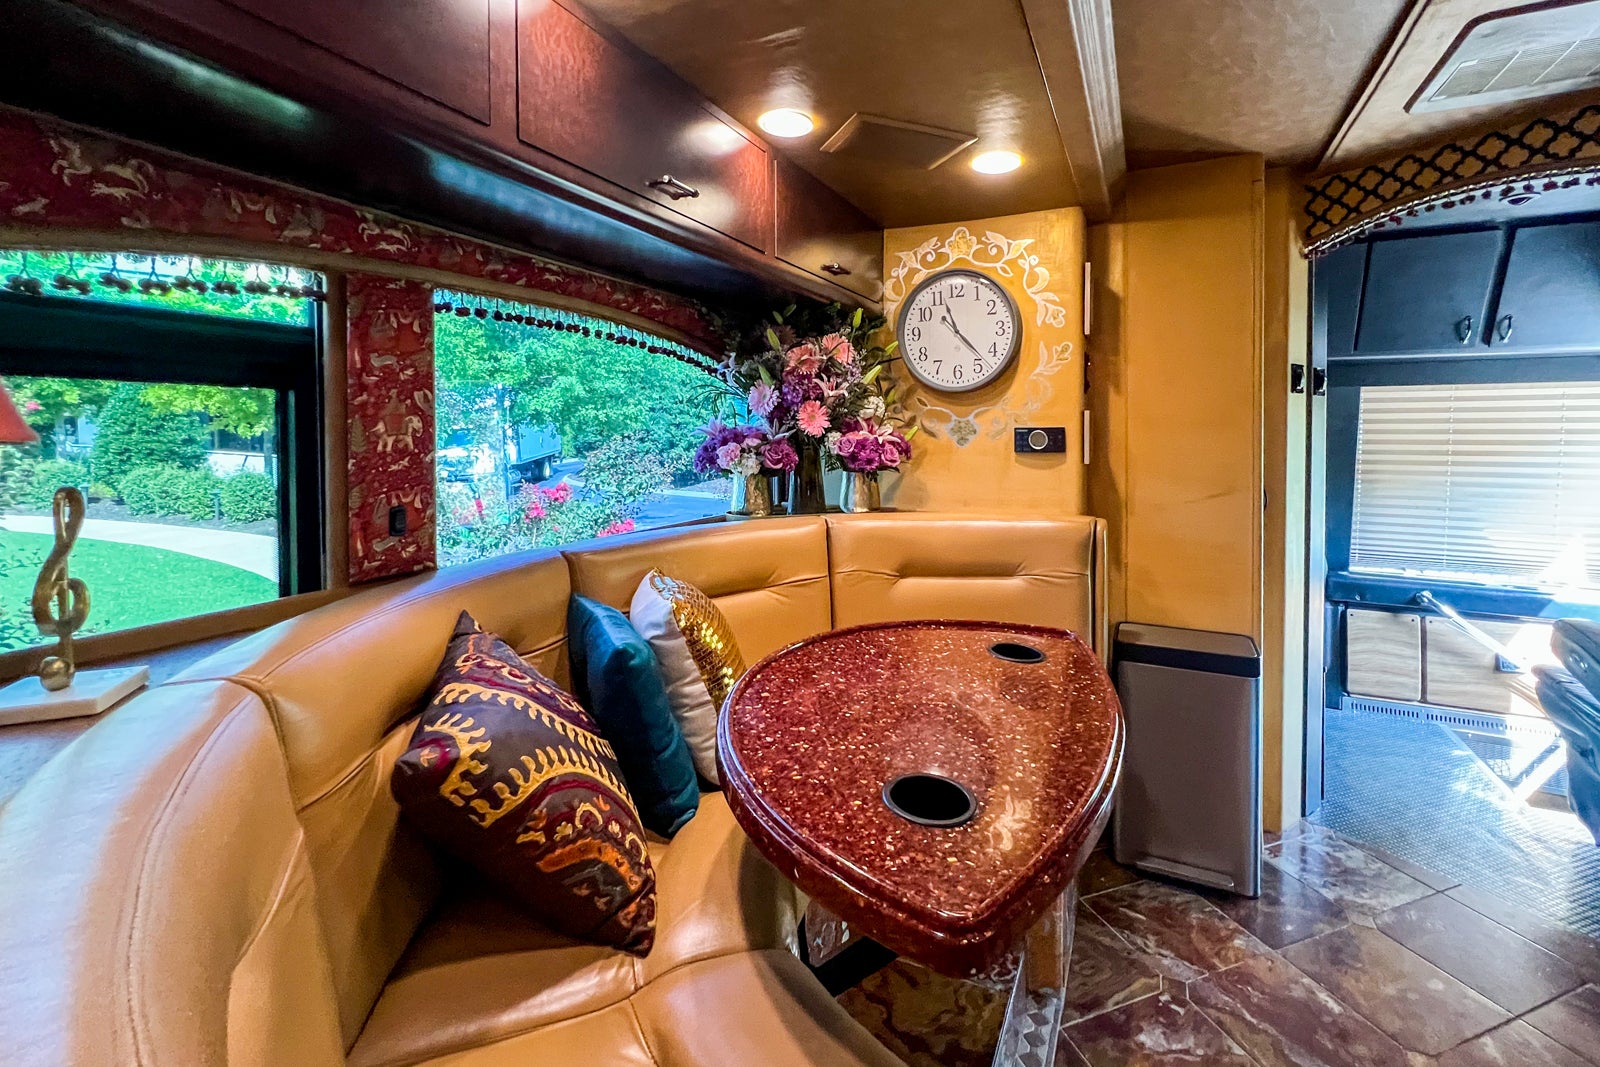 pictures of dolly parton's tour bus